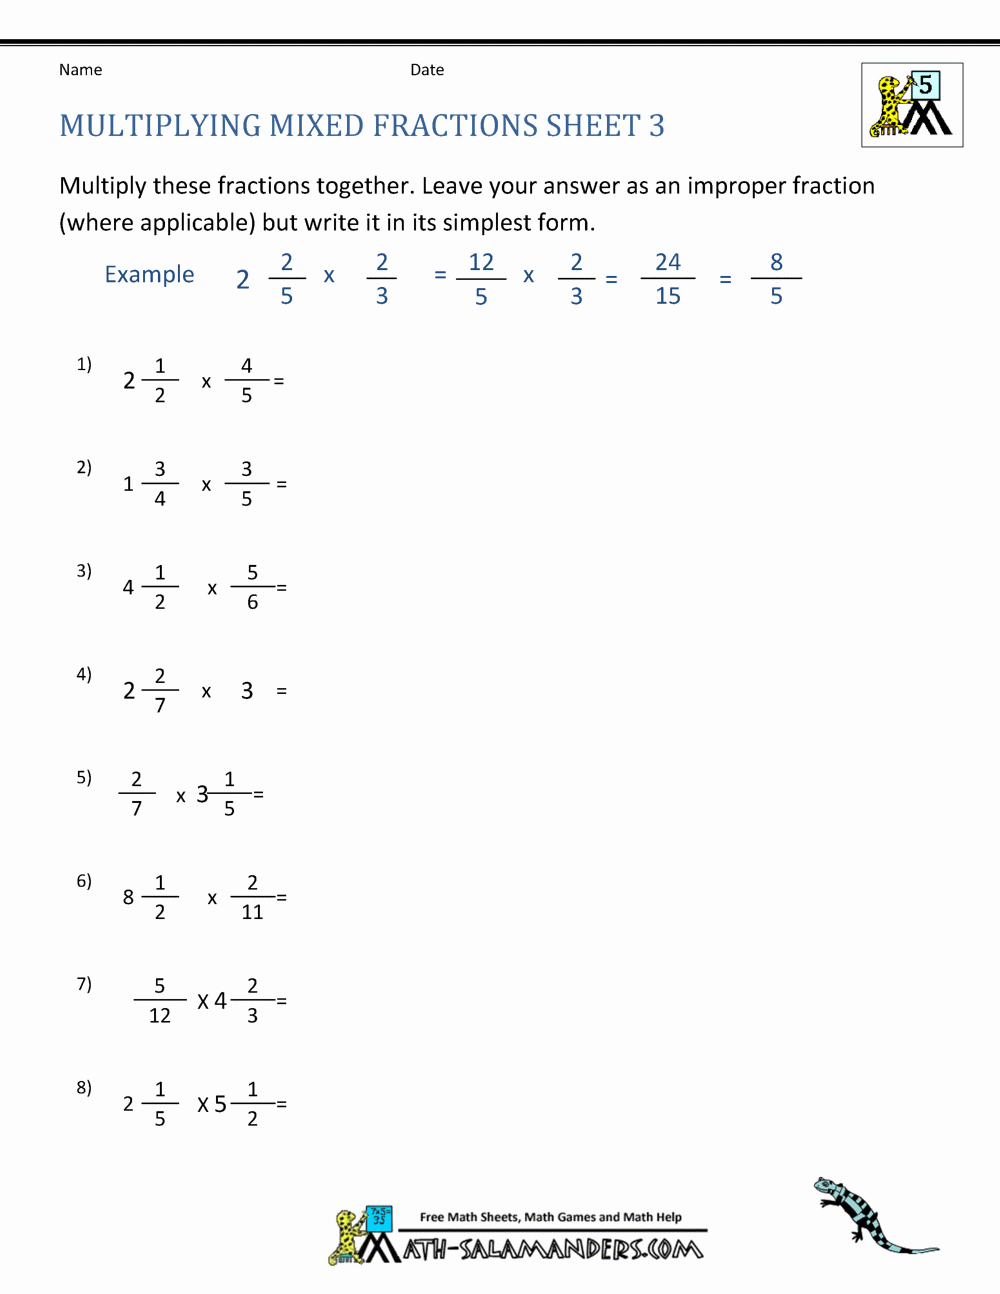 Multiplying Mixed Fractions Worksheet Awesome Multiplying Mixed Fractions